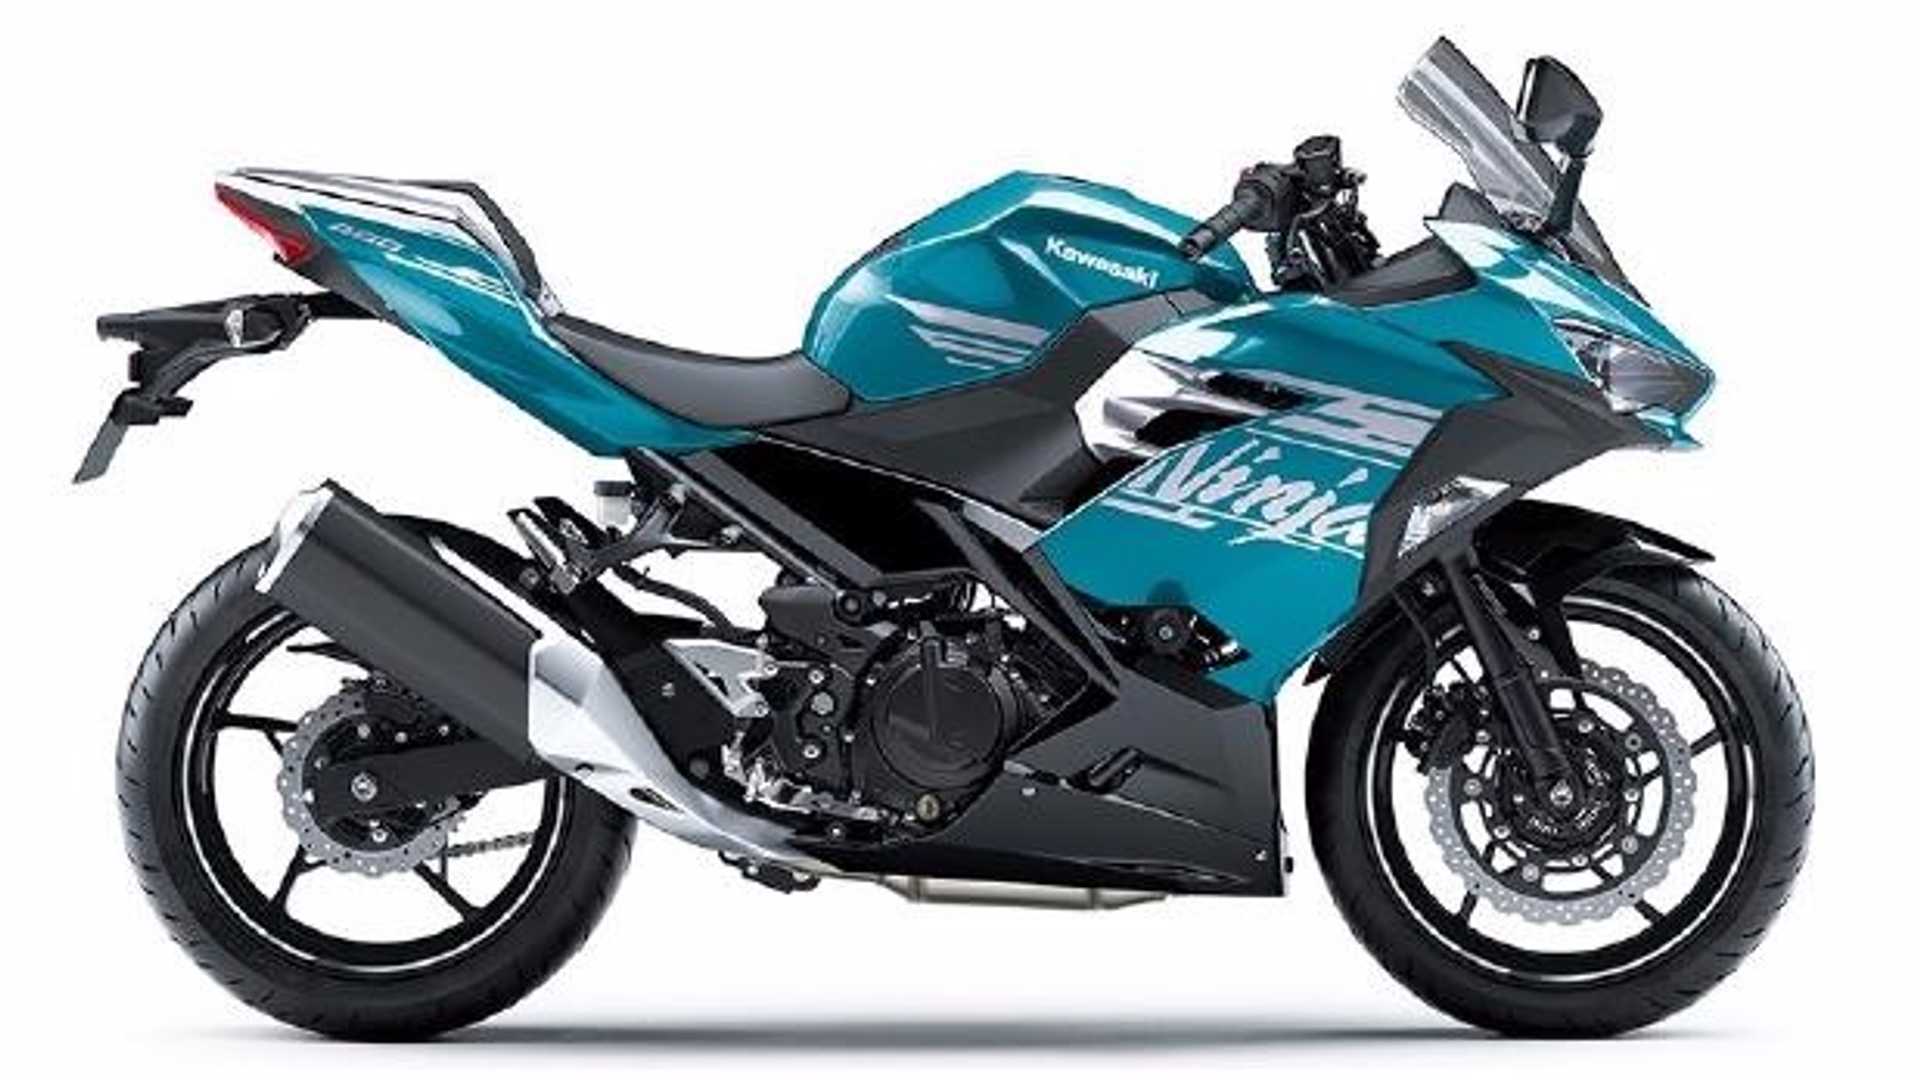 New colors for the Kawasaki Ninja 400 2021
- also in the App MOTORCYCLE NEWS